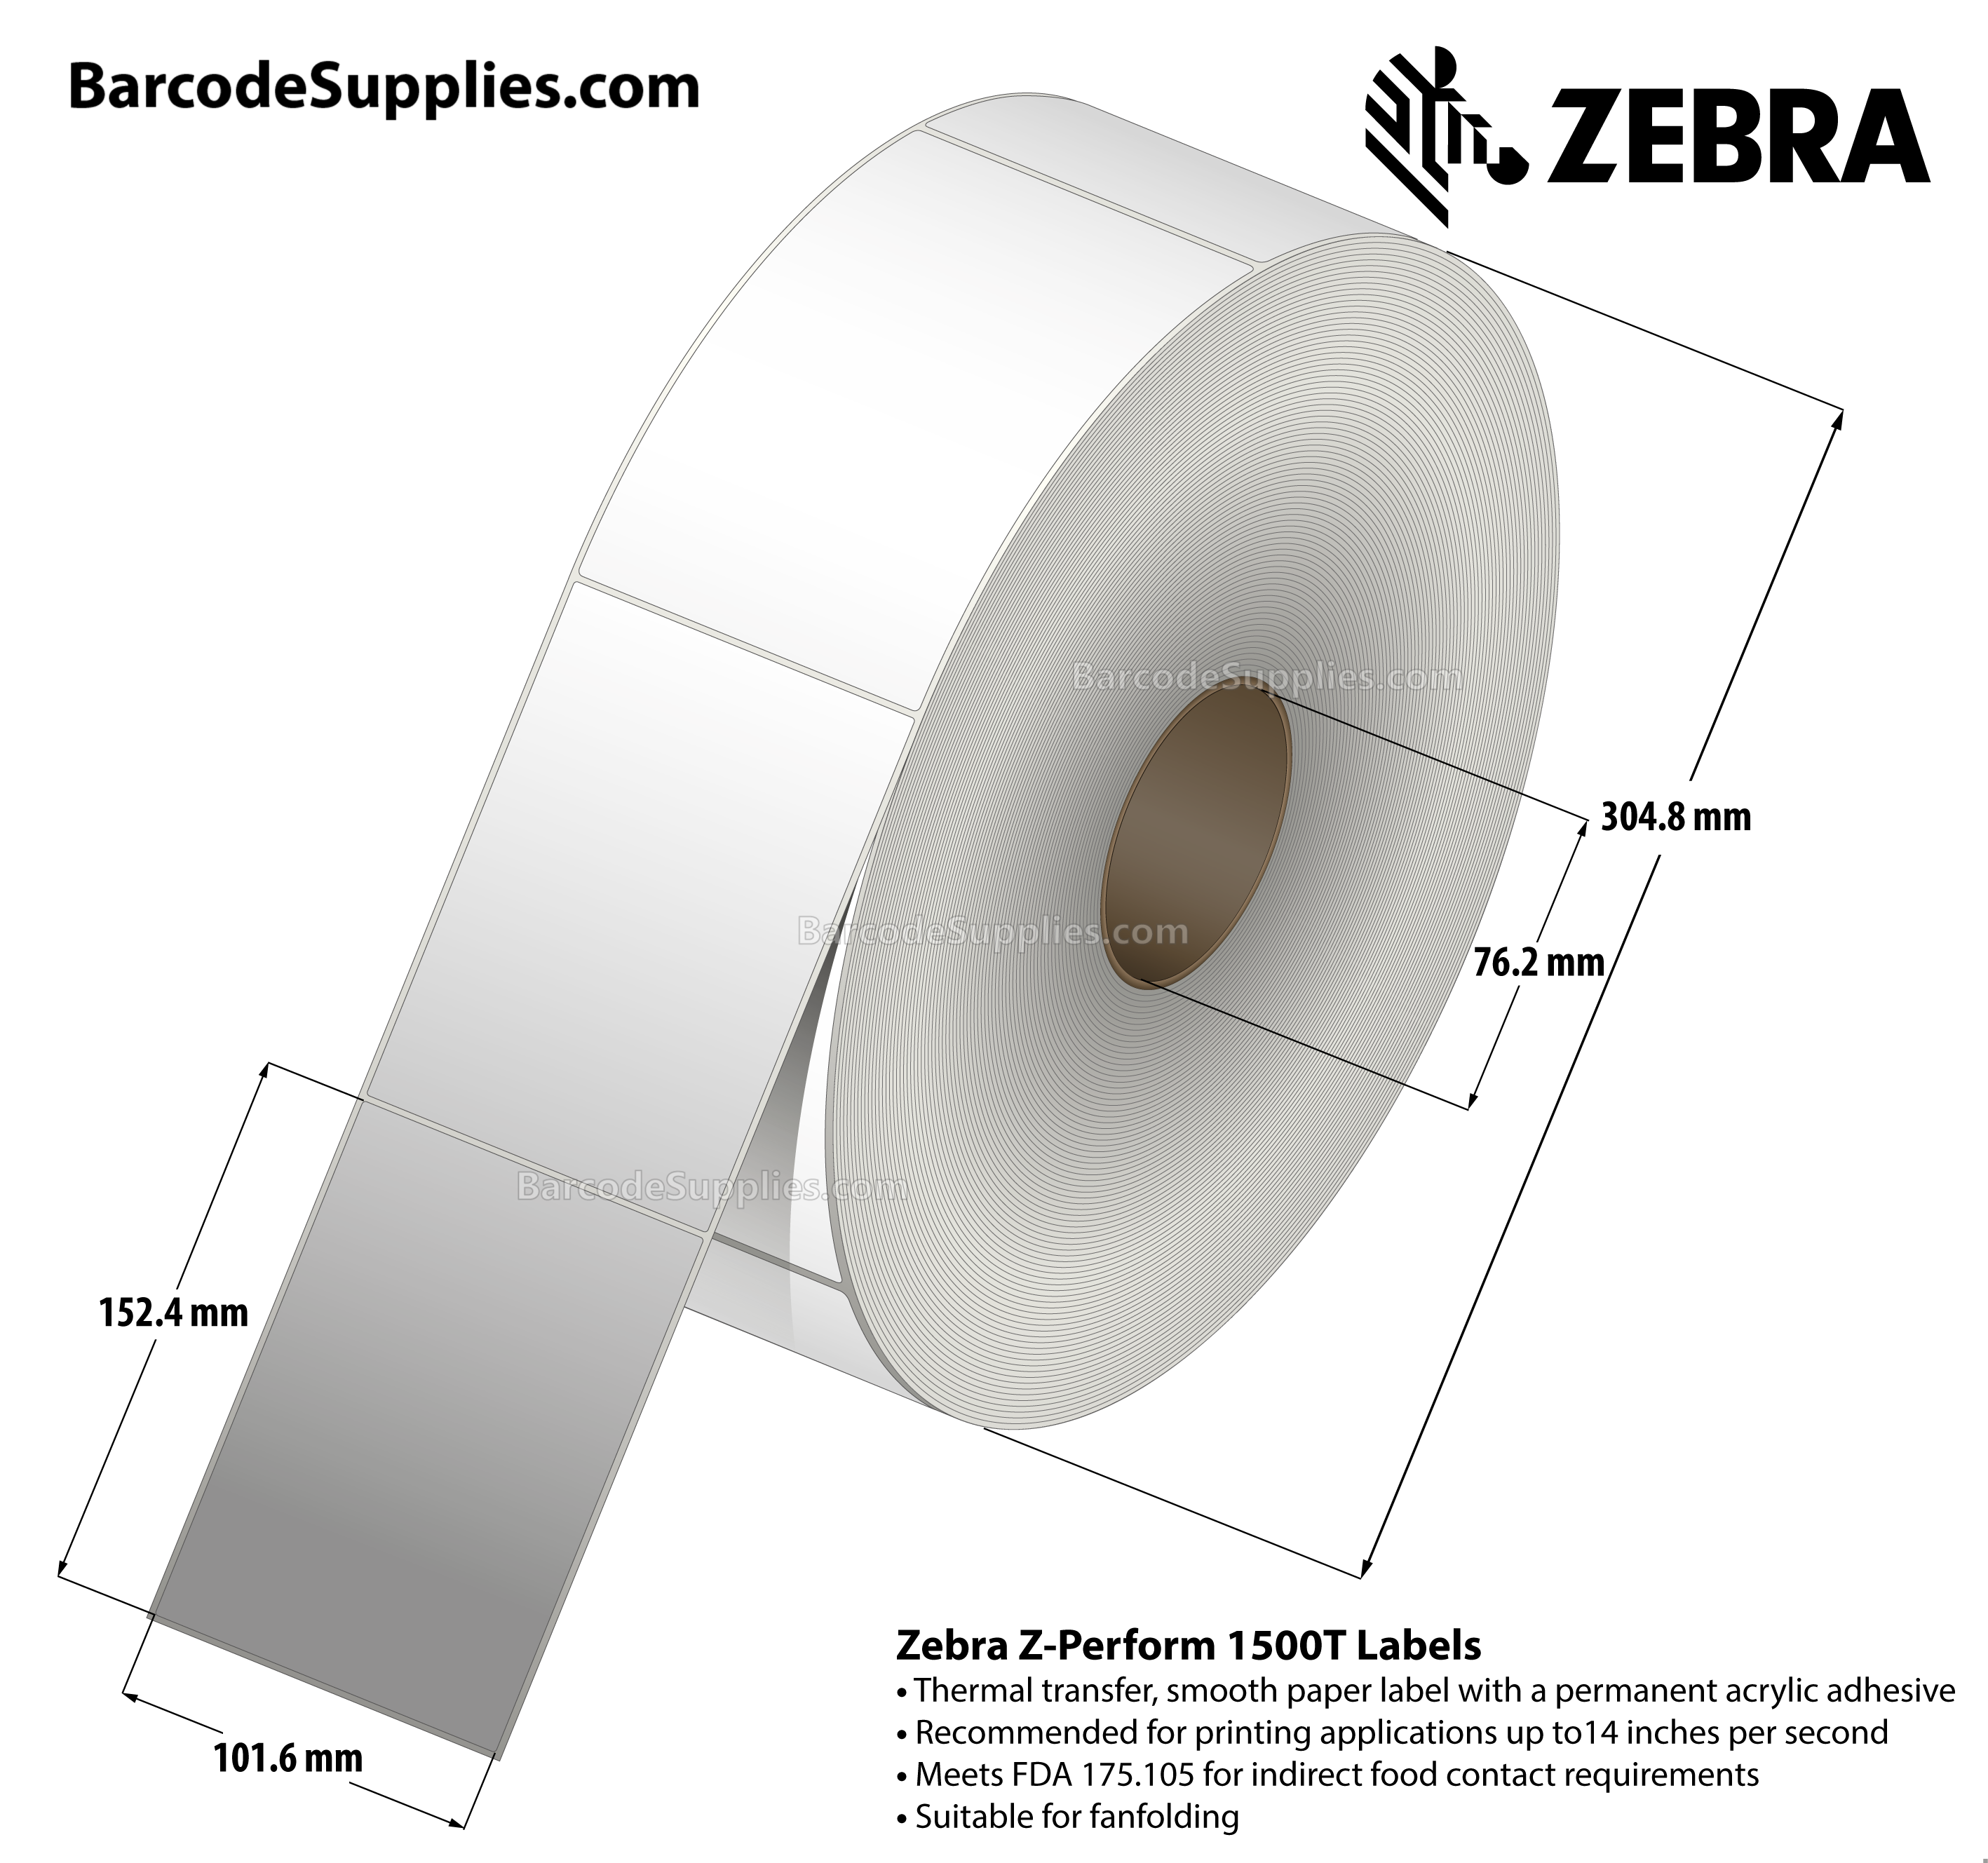 4 x 6 Thermal Transfer White Z-Perform 1500T Labels With Permanent Adhesive - Automatic application. - Not Perforated - 2750 Labels Per Roll - Carton Of 2 Rolls - 5500 Labels Total - MPN: 10026038